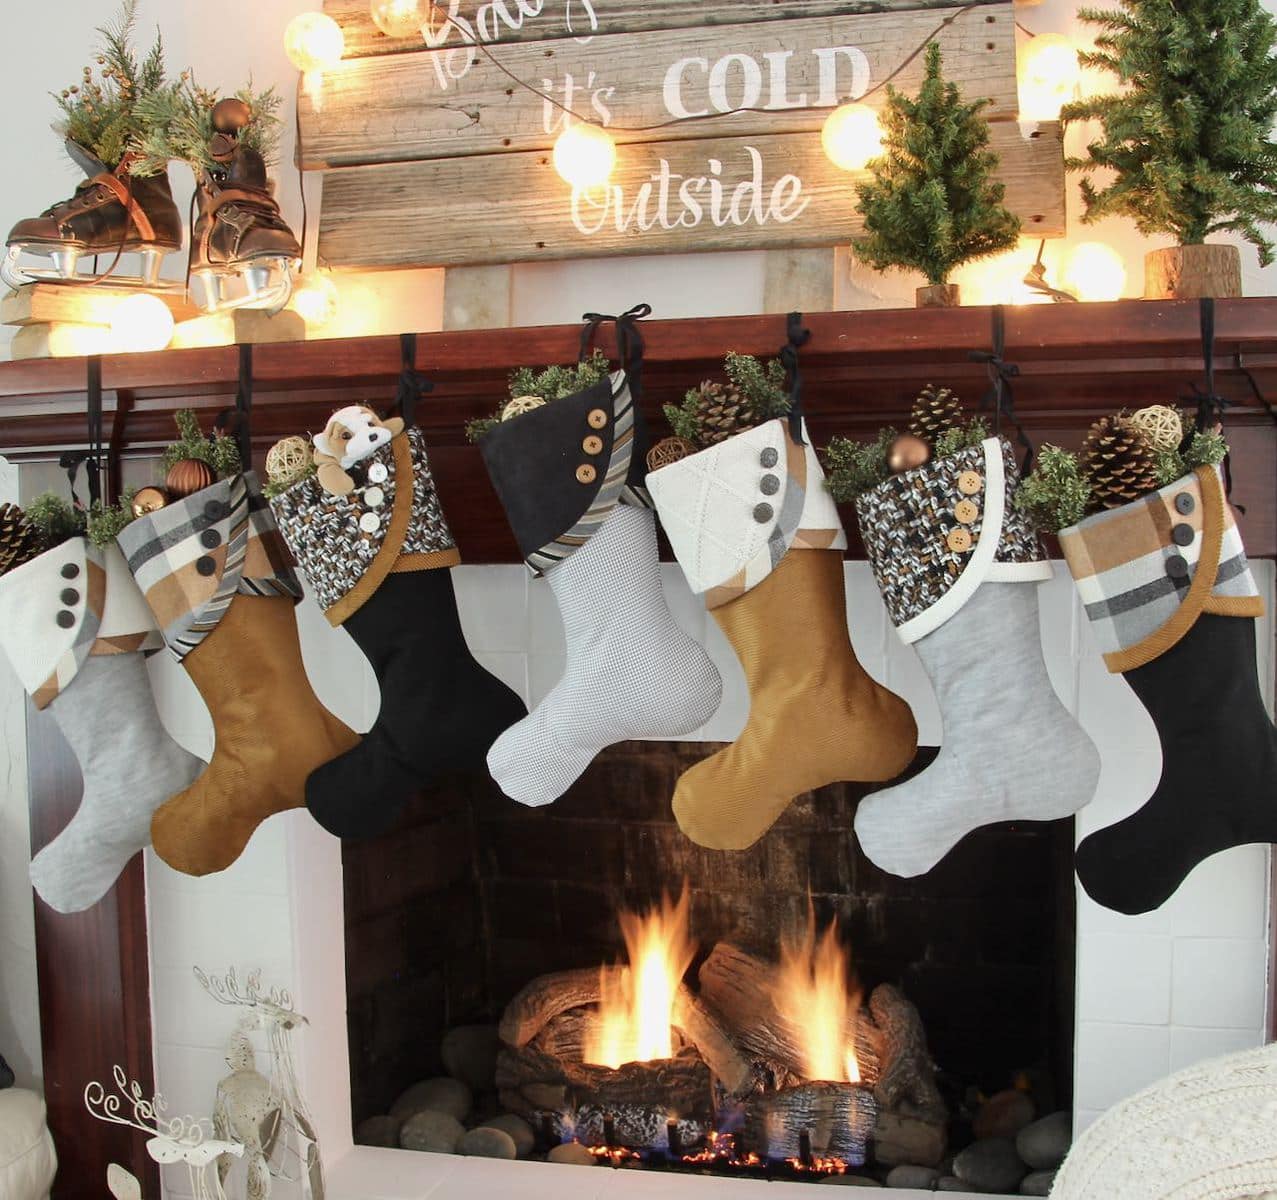 7 Casual Cozy Christmas Stockings below a "Baby, It's Cold Outside" sign made of reclaimed wood with globe lights and vintage ice skates